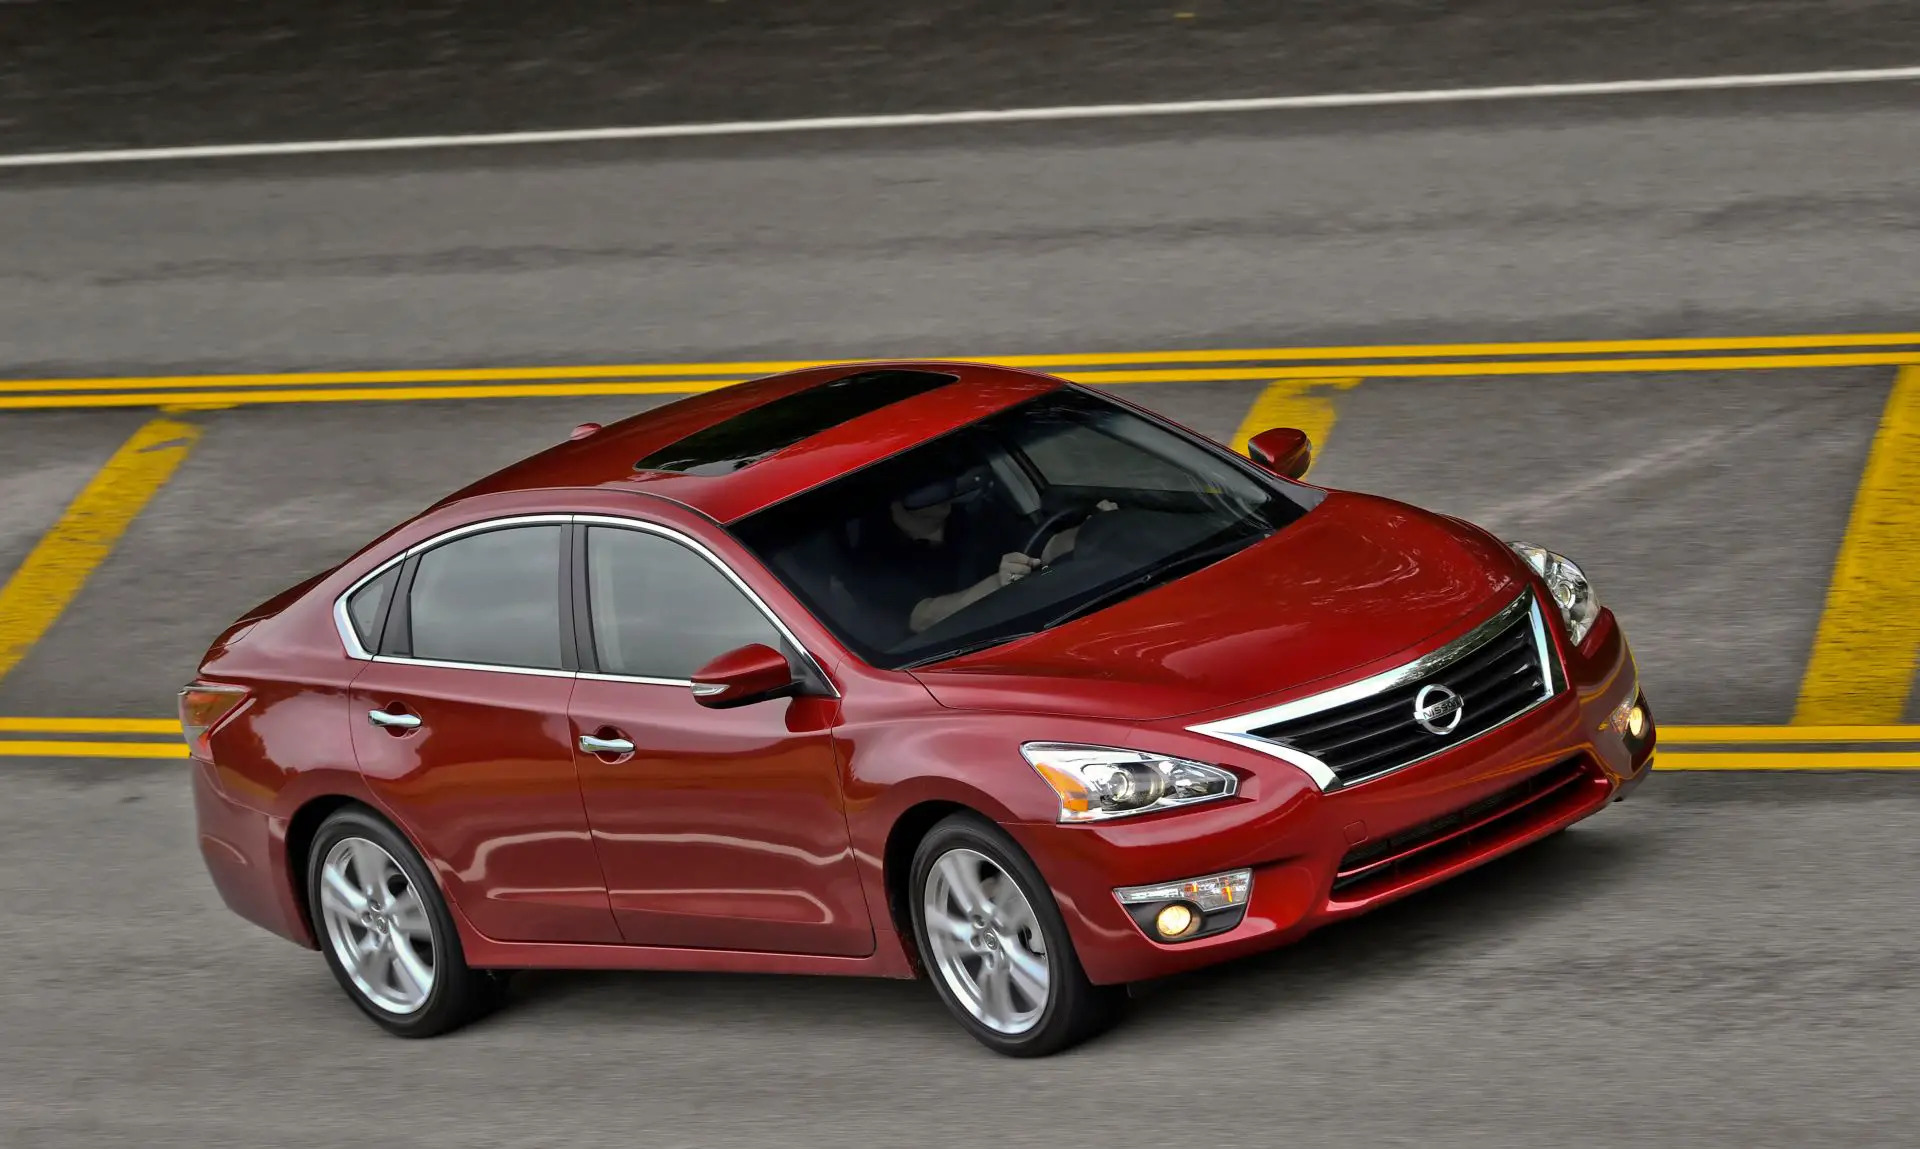 Engine Malfunction Reduced Power Nissan Altima How To Fix?